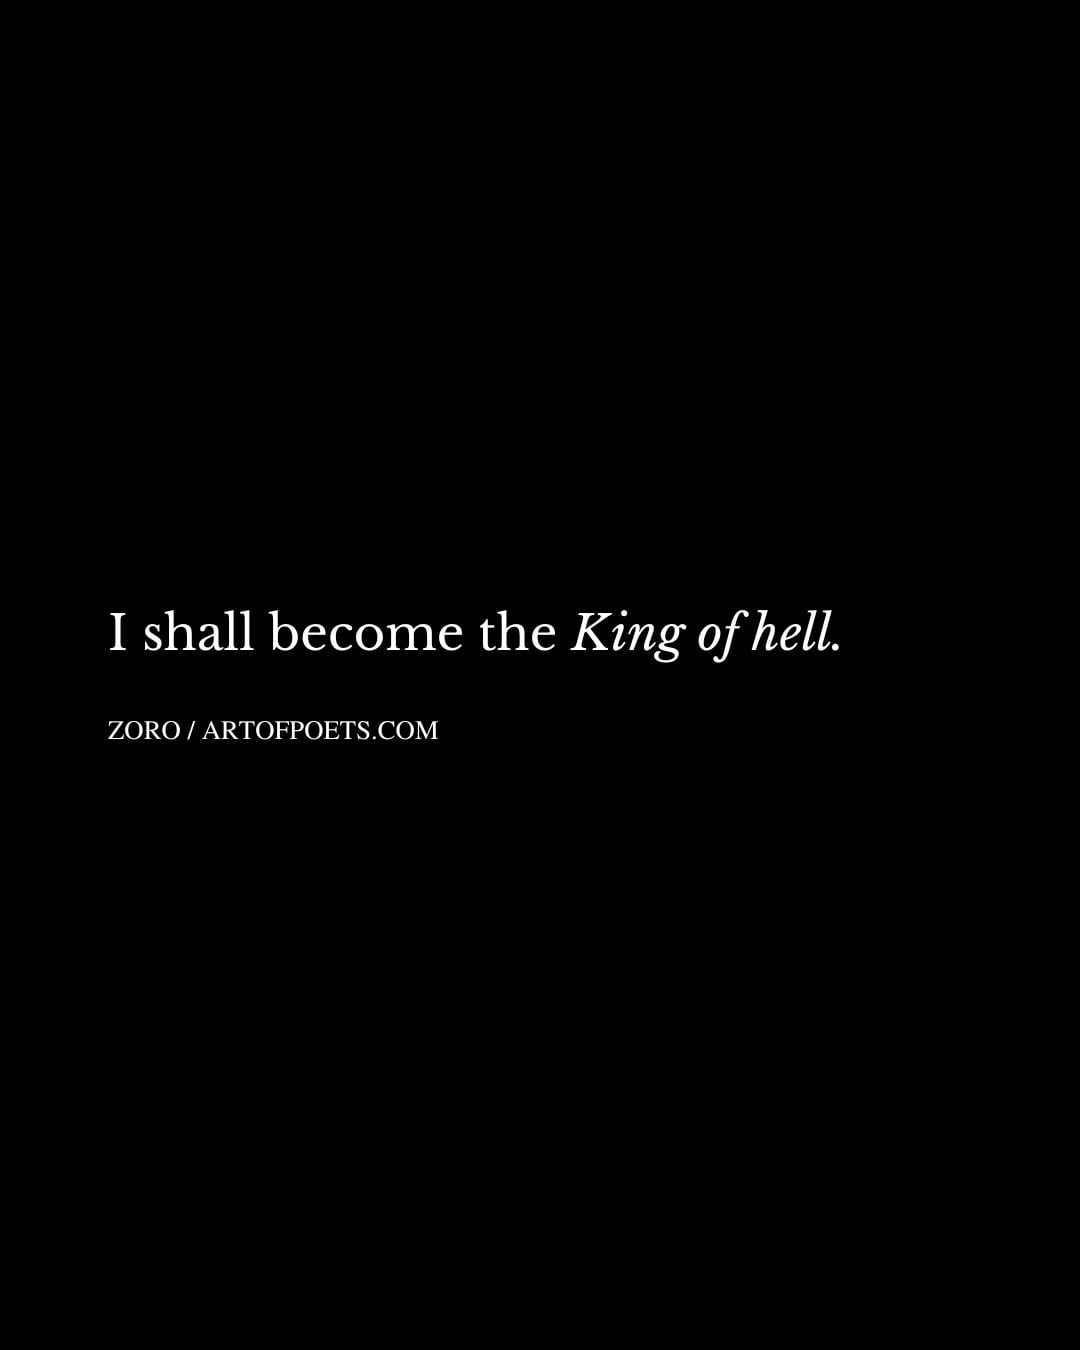 I shall become the King of hell